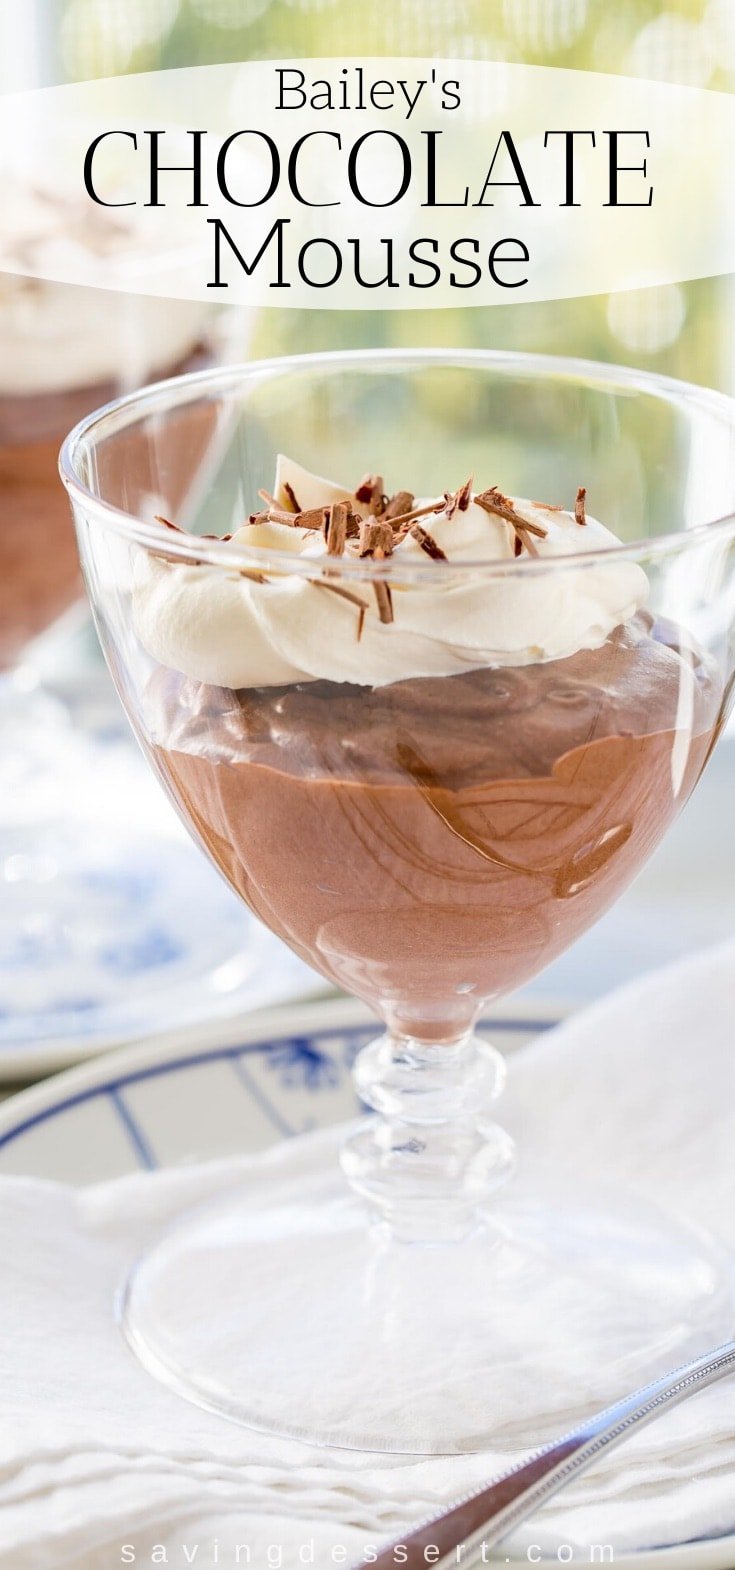 A glass filled with light chocolate mousse topped with whipped cream and grated chocolate